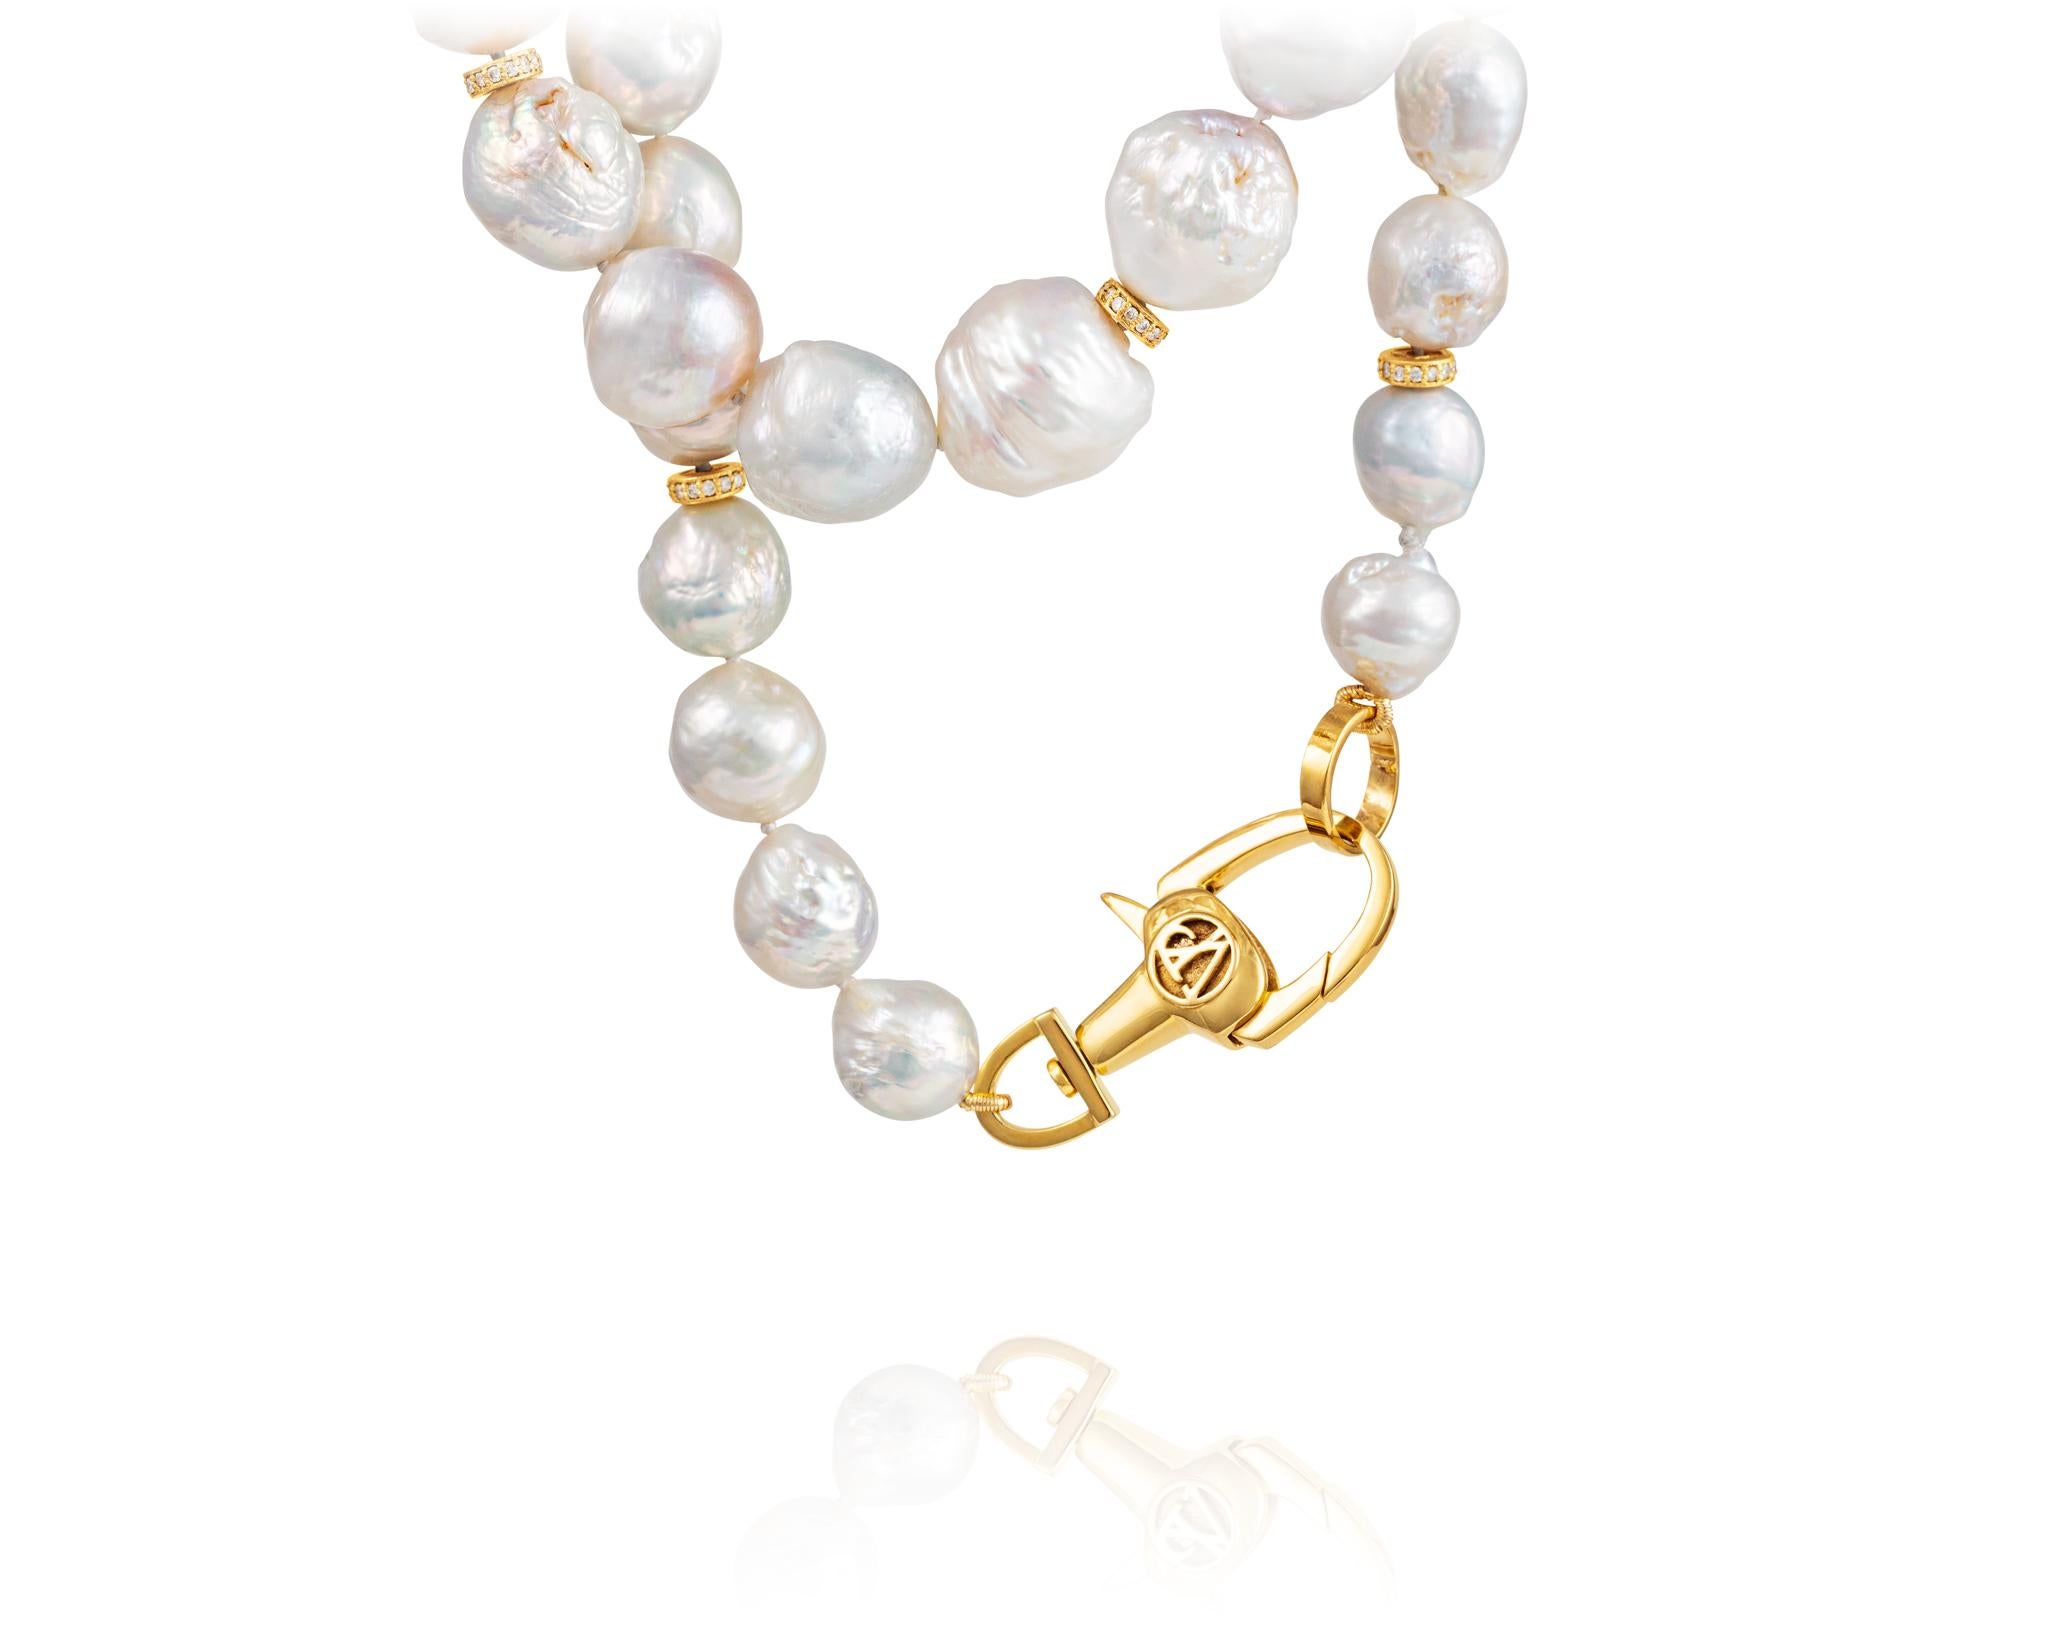 Part of the Vincent Peach Pearl Collection, the Equestrian White Fireball Necklace features a weighty and luxurious 36